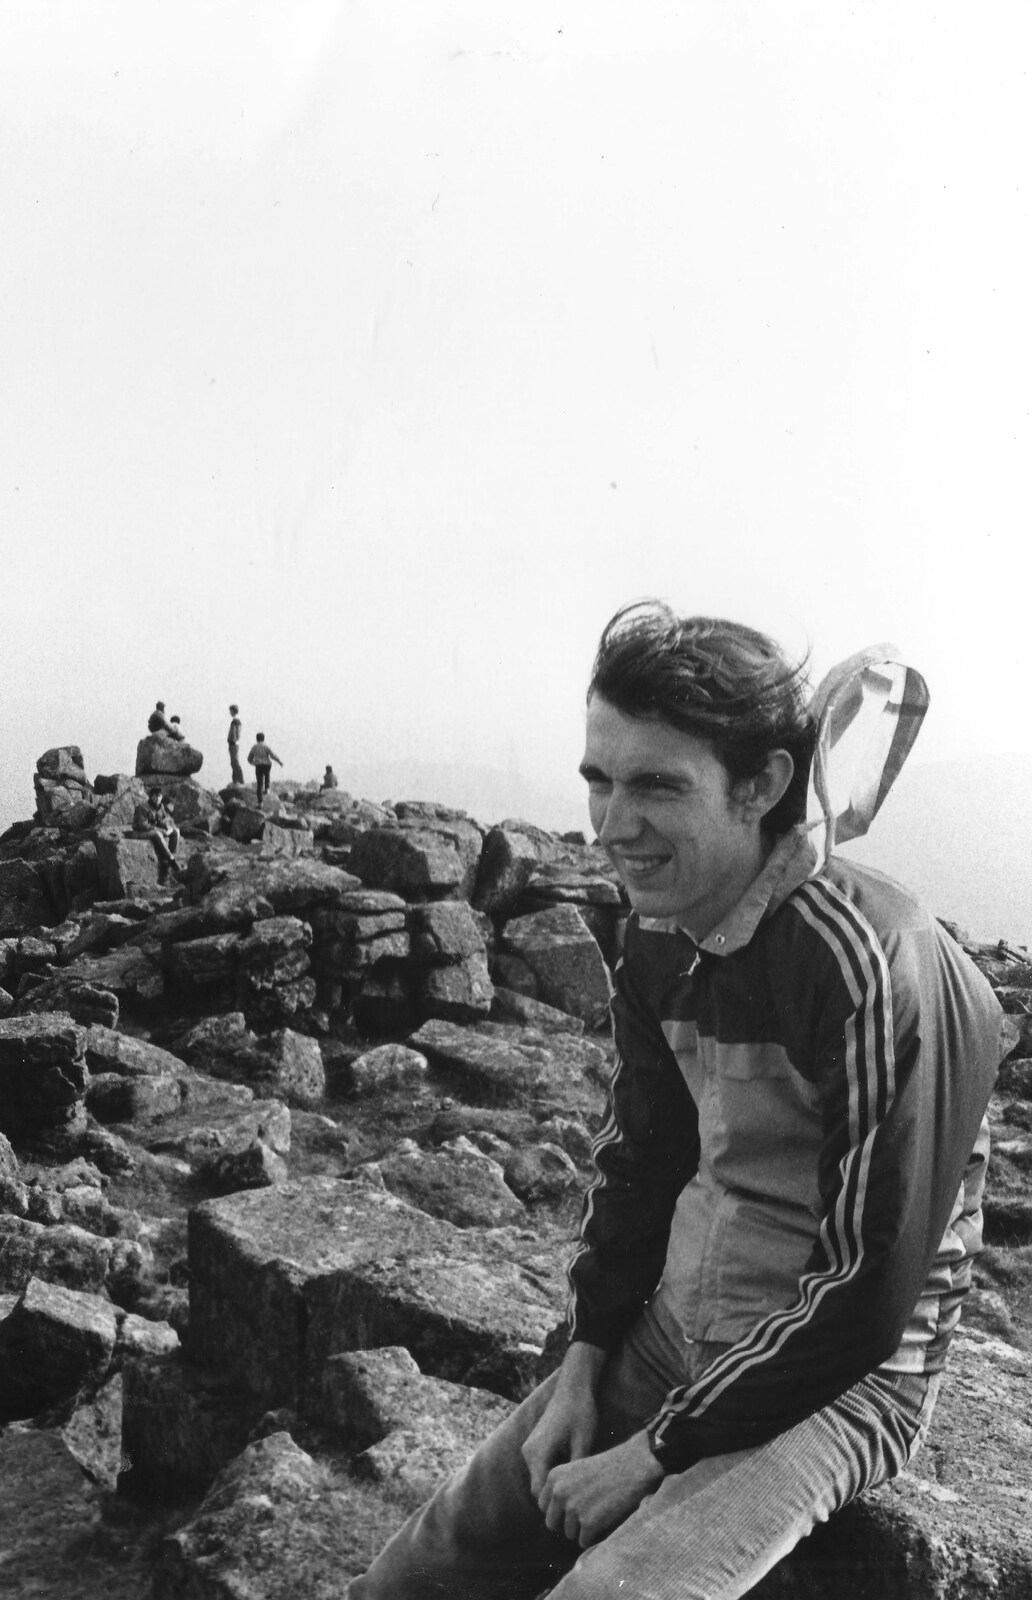 Dave on 'Trotsky's Mount' from Uni: The First Year in Black and White, Plymouth Polytechnic, Devon - 8th April 1986